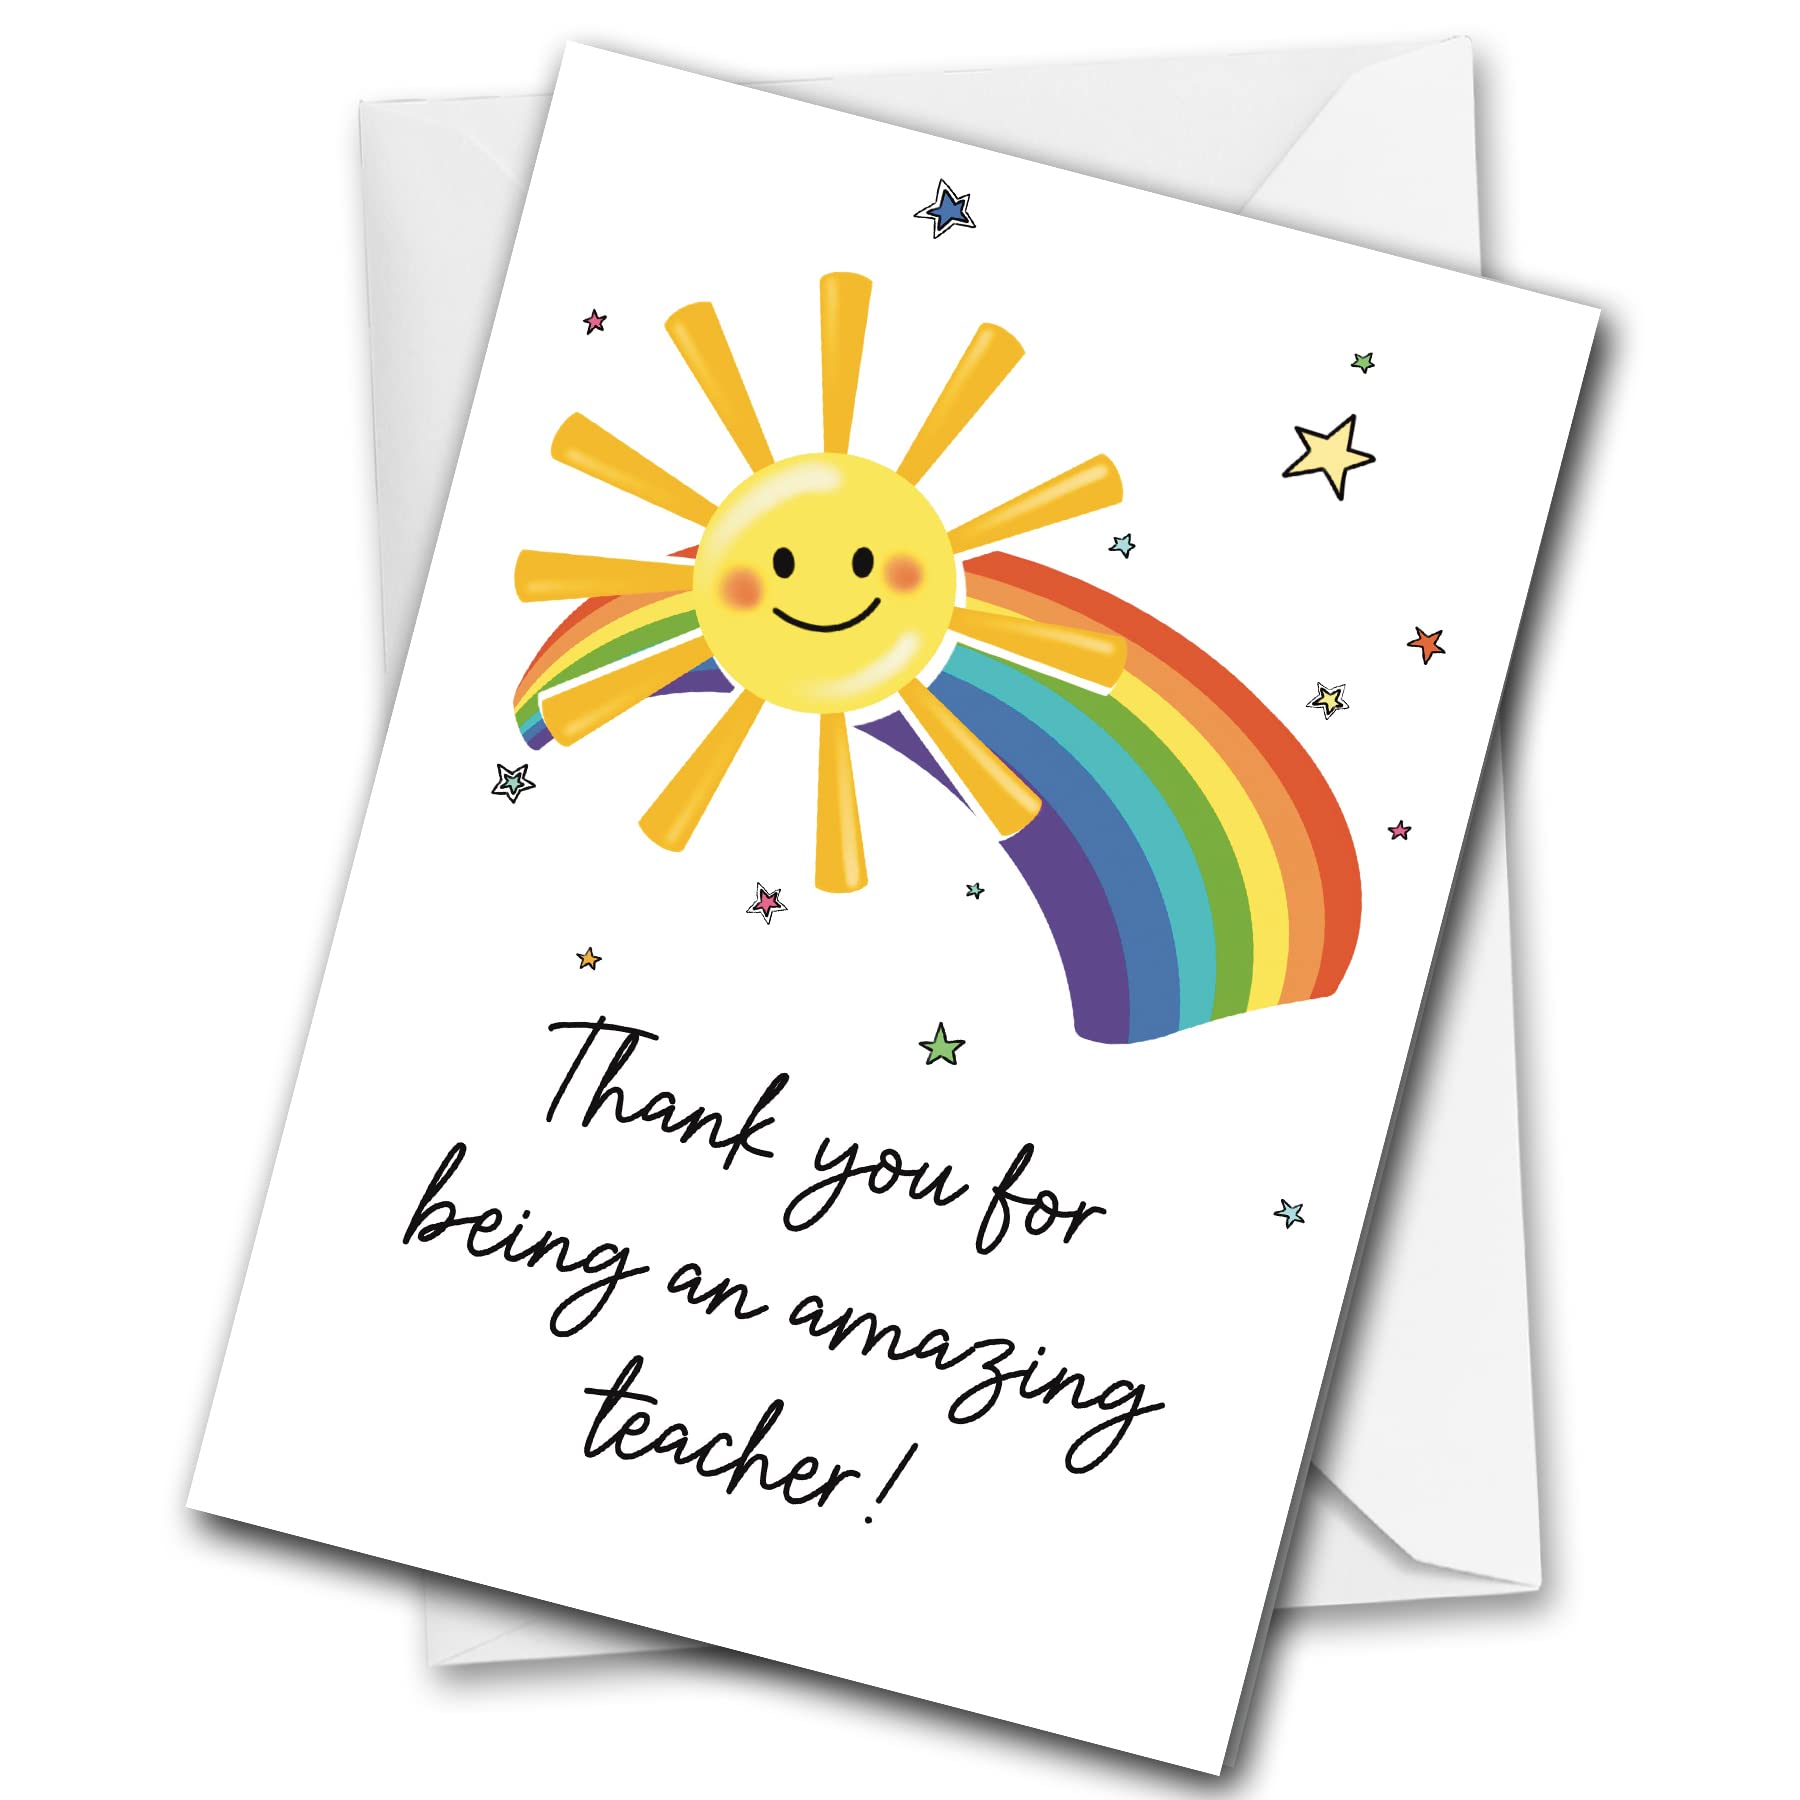 Thank you card with well wishes